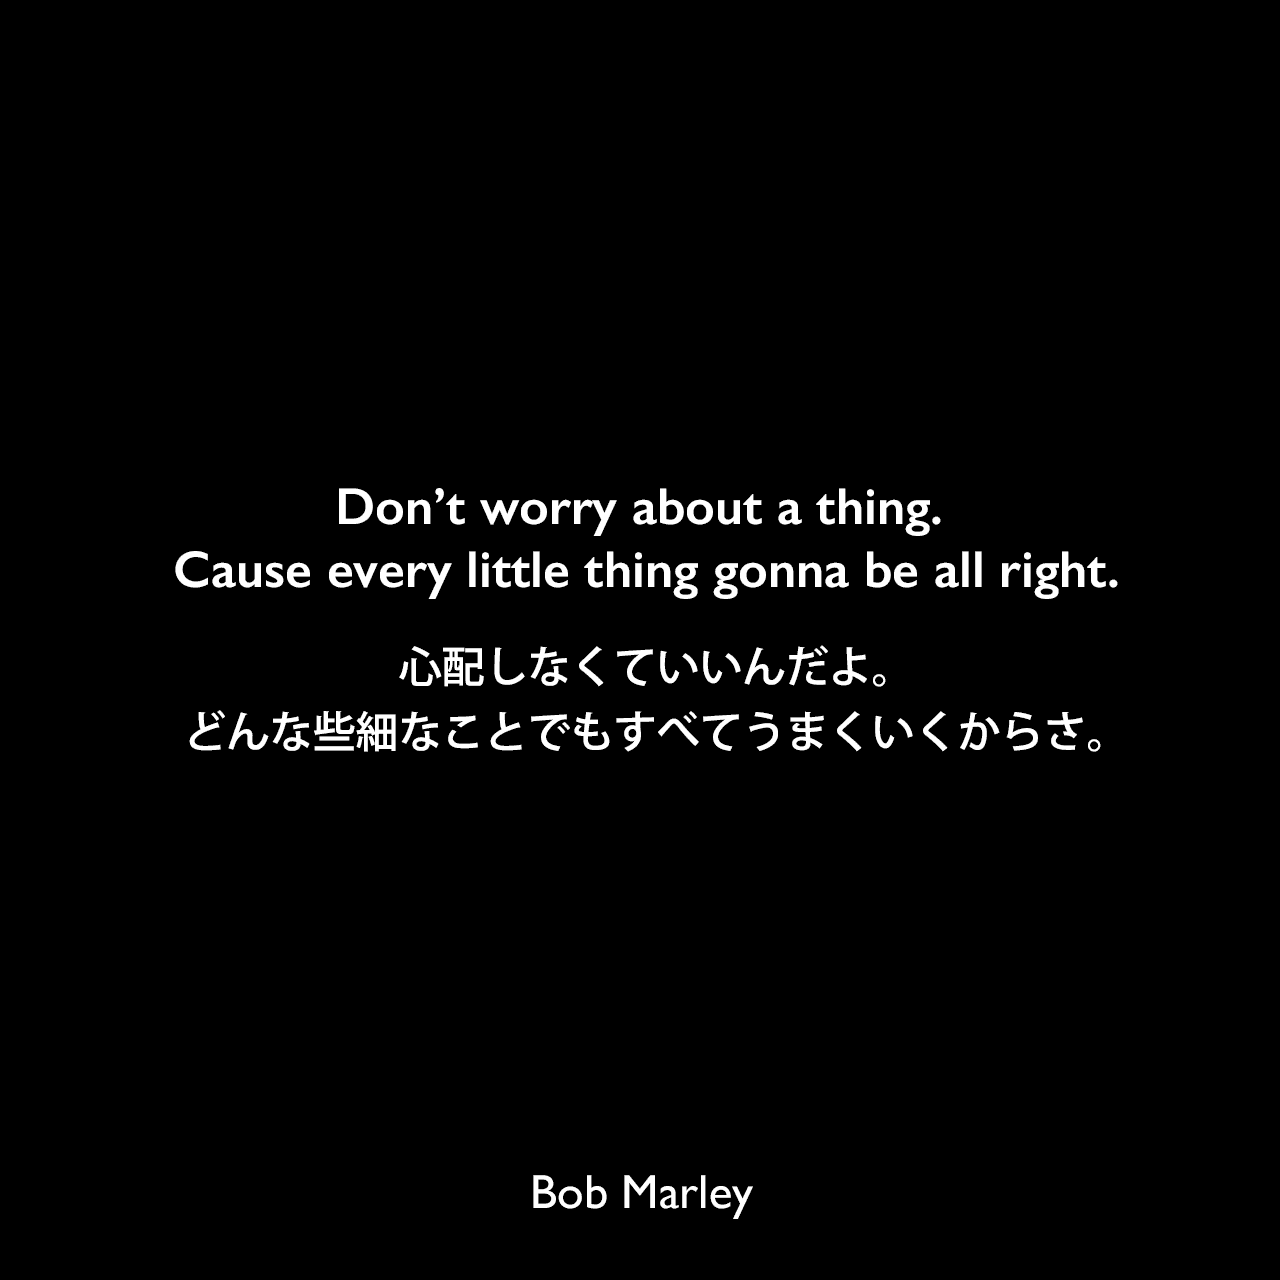 Don’t worry about a thing. Cause every little thing gonna be all right.心配しなくていいんだよ。どんな些細なことでもすべてうまくいくからさ。Bob Marley